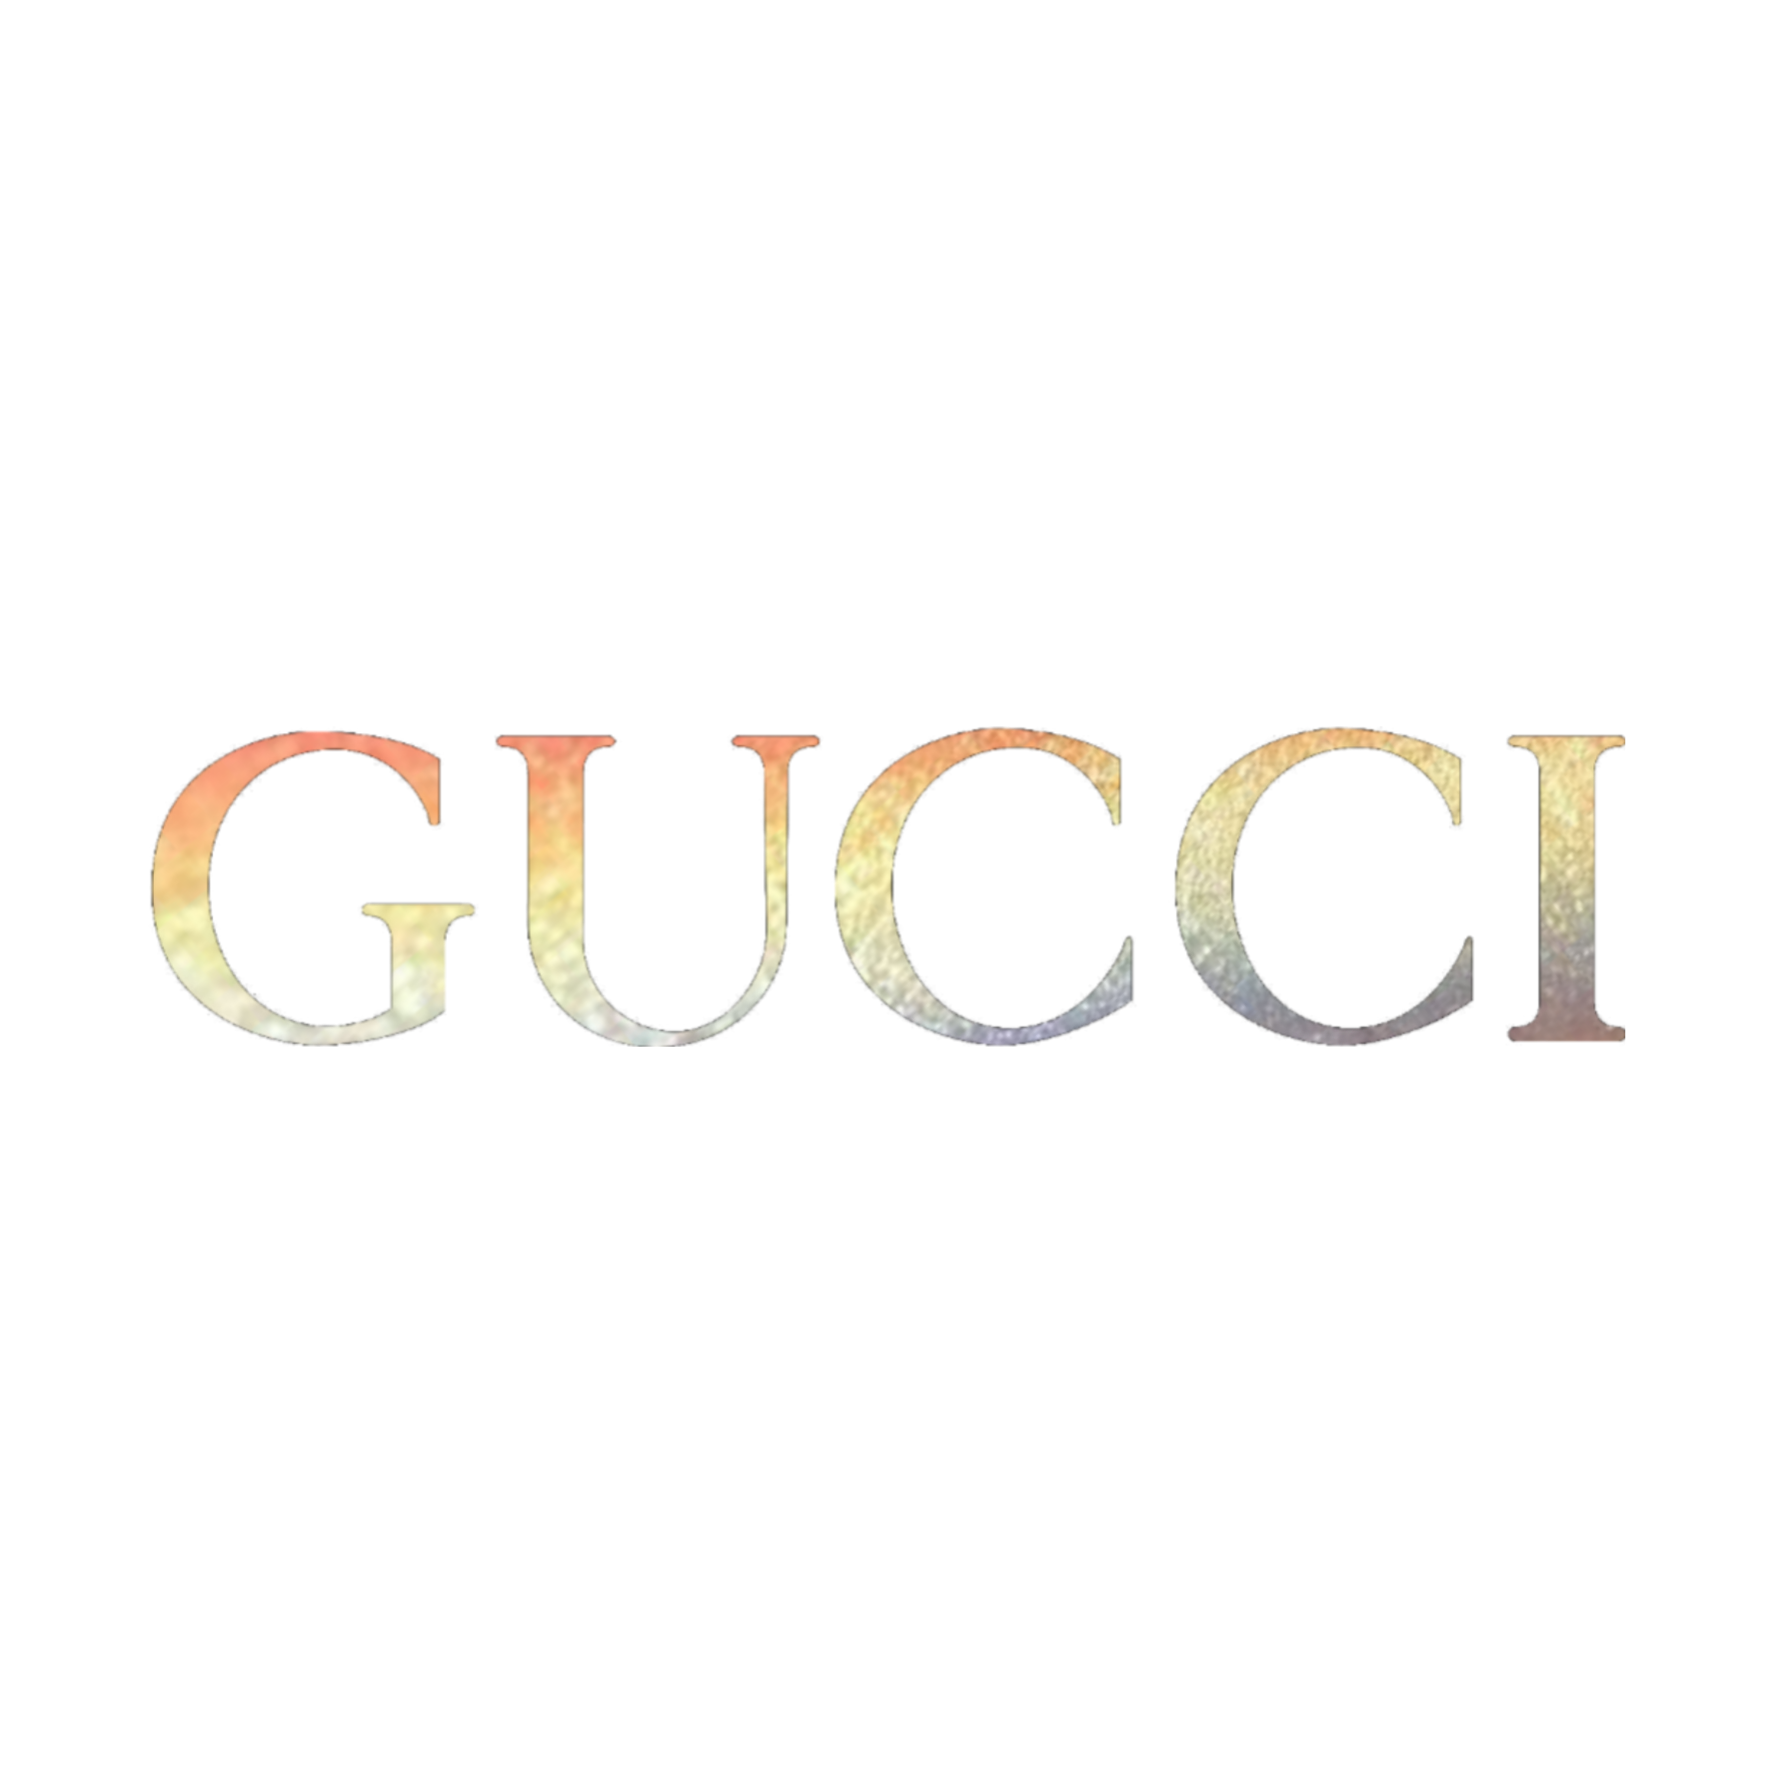 rainbow gucci logo tumblr aesthetic sticker by @just_mee_